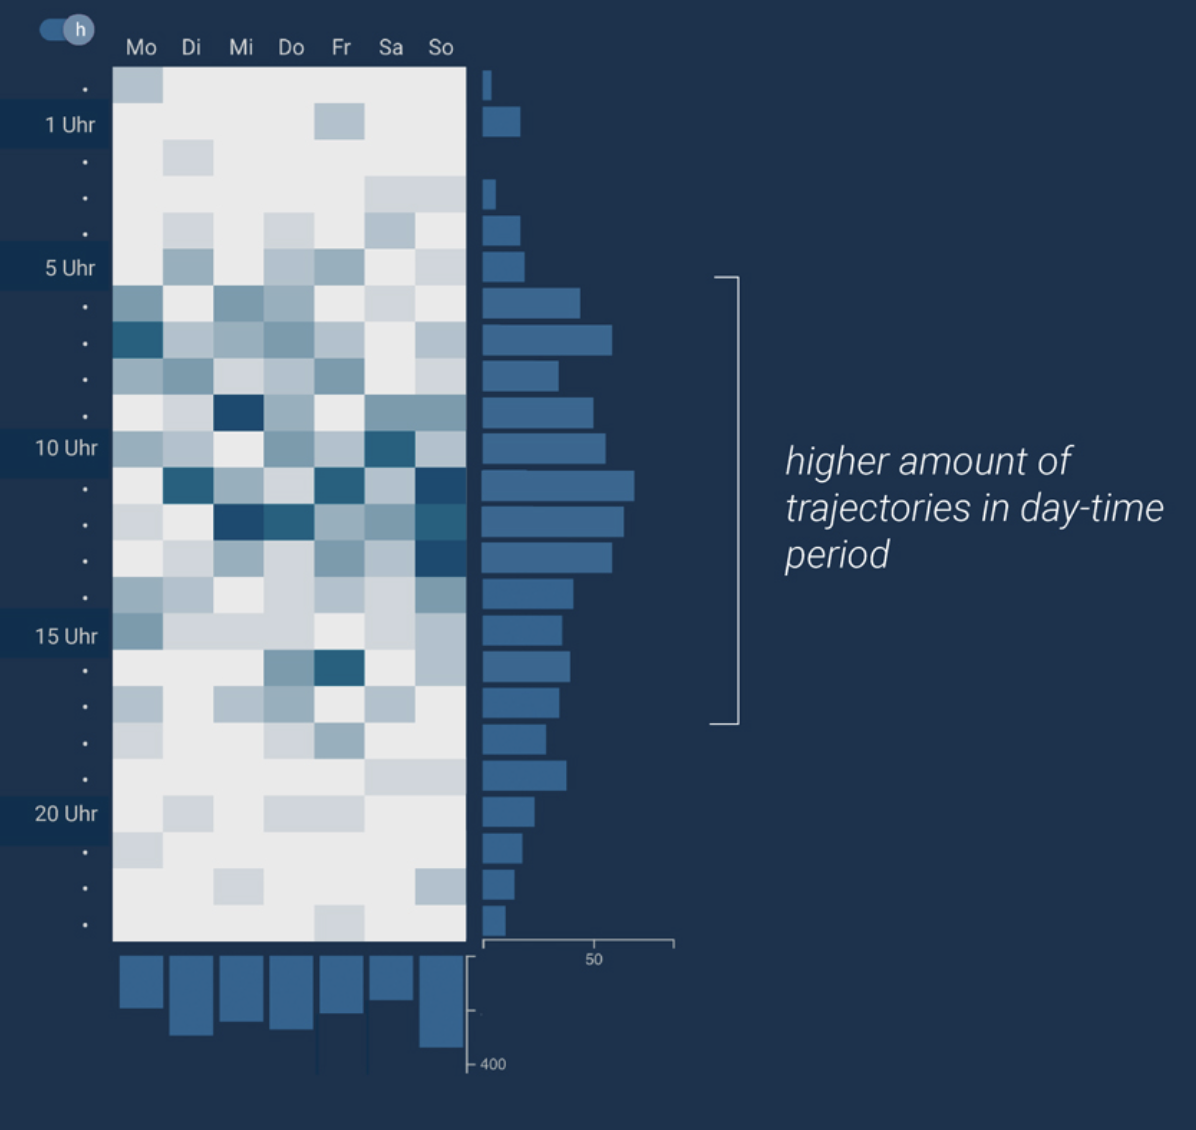 A heatmap showing hourly data over the course of 7 days